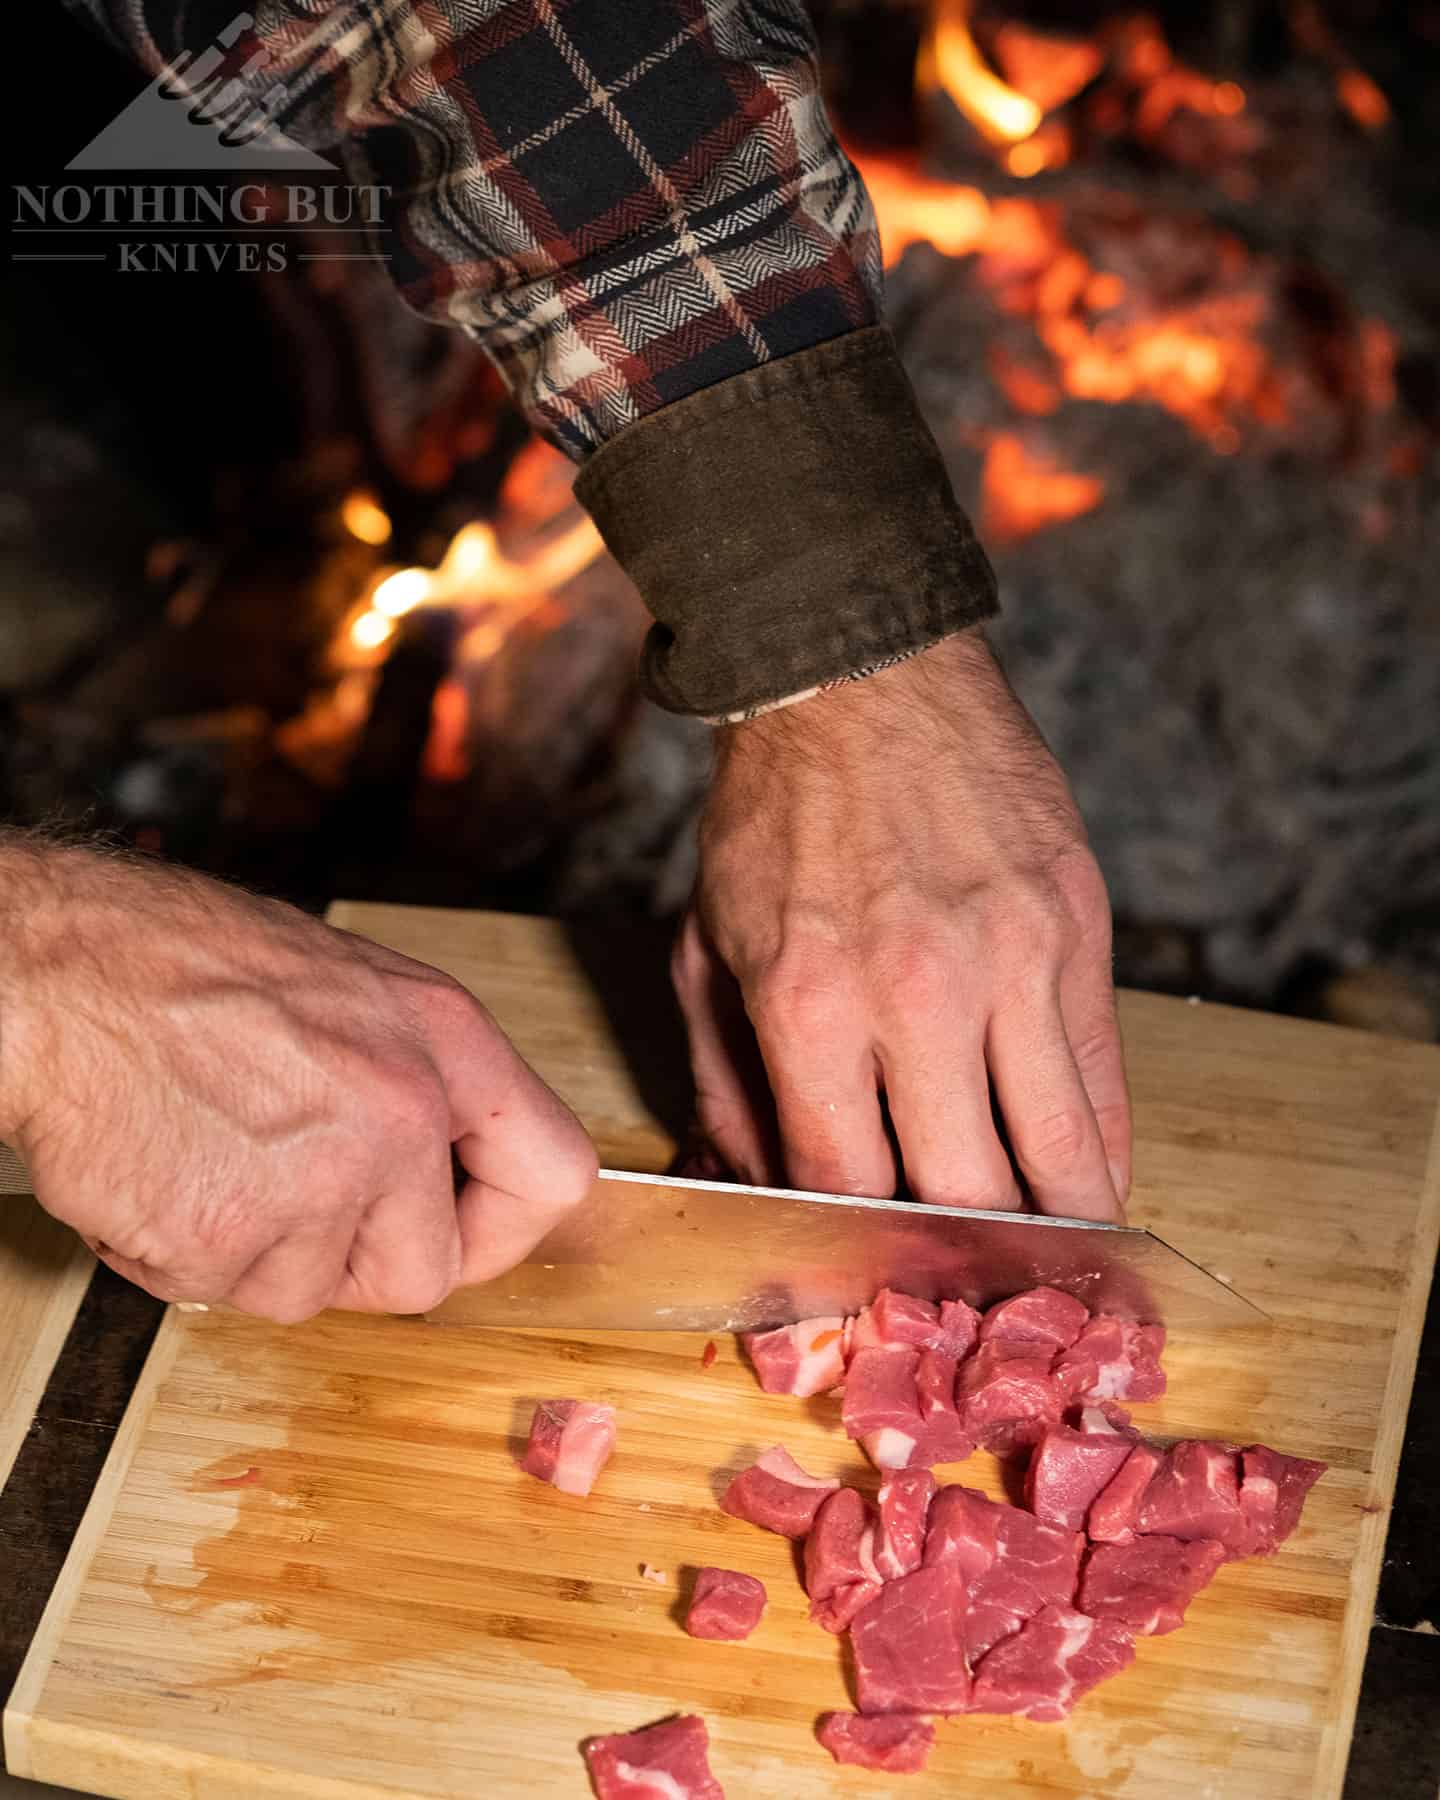 https://www.nothingbutknives.com/wp-content/uploads/2023/01/Cutting-Meat-with-the-Overland-Chef-Knife.jpg